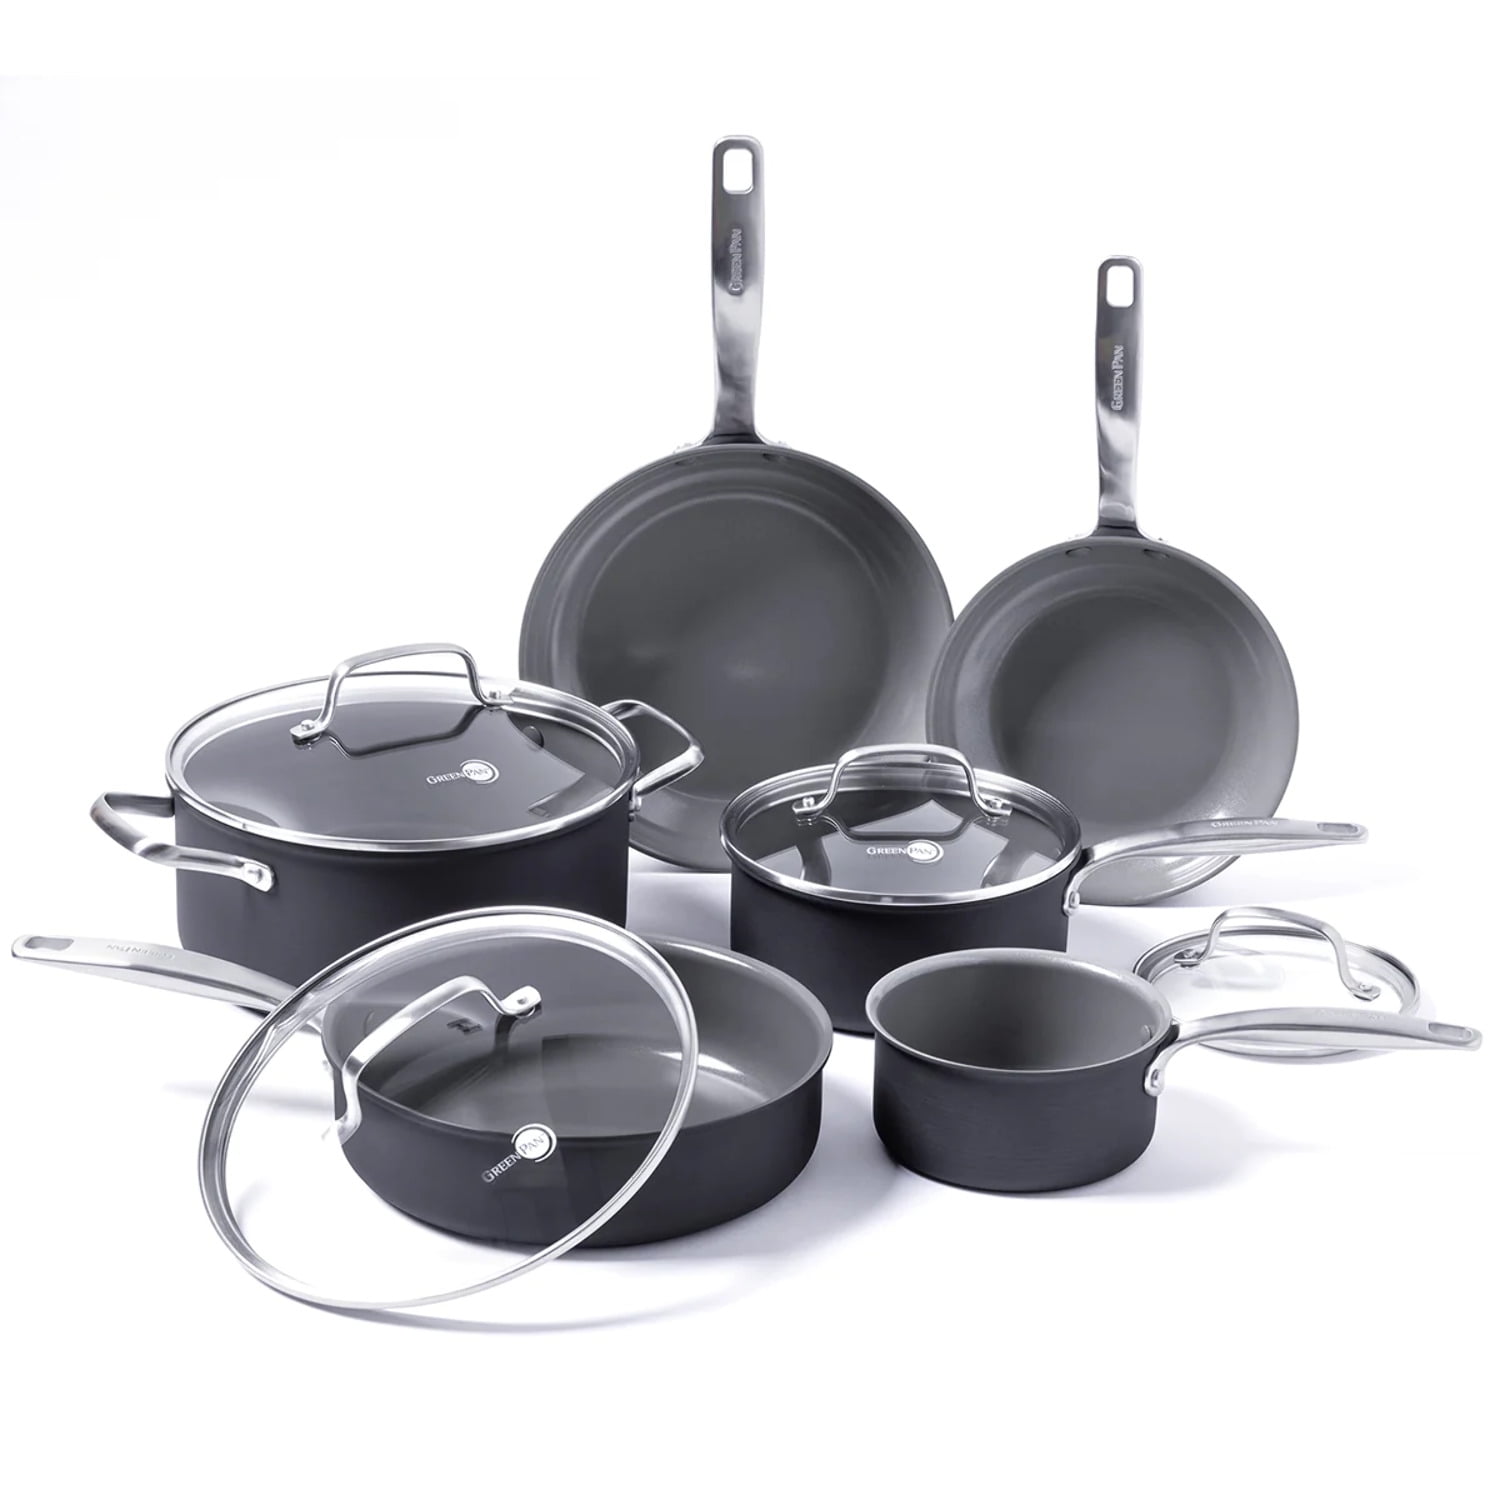 GreenPan Treviso Stainless Steel Healthy Ceramic Nonstick, 10 Piece Cookware Pots and Pans Set, PFAS-Free, Clad, Induction, Dishwasher Safe, Silver